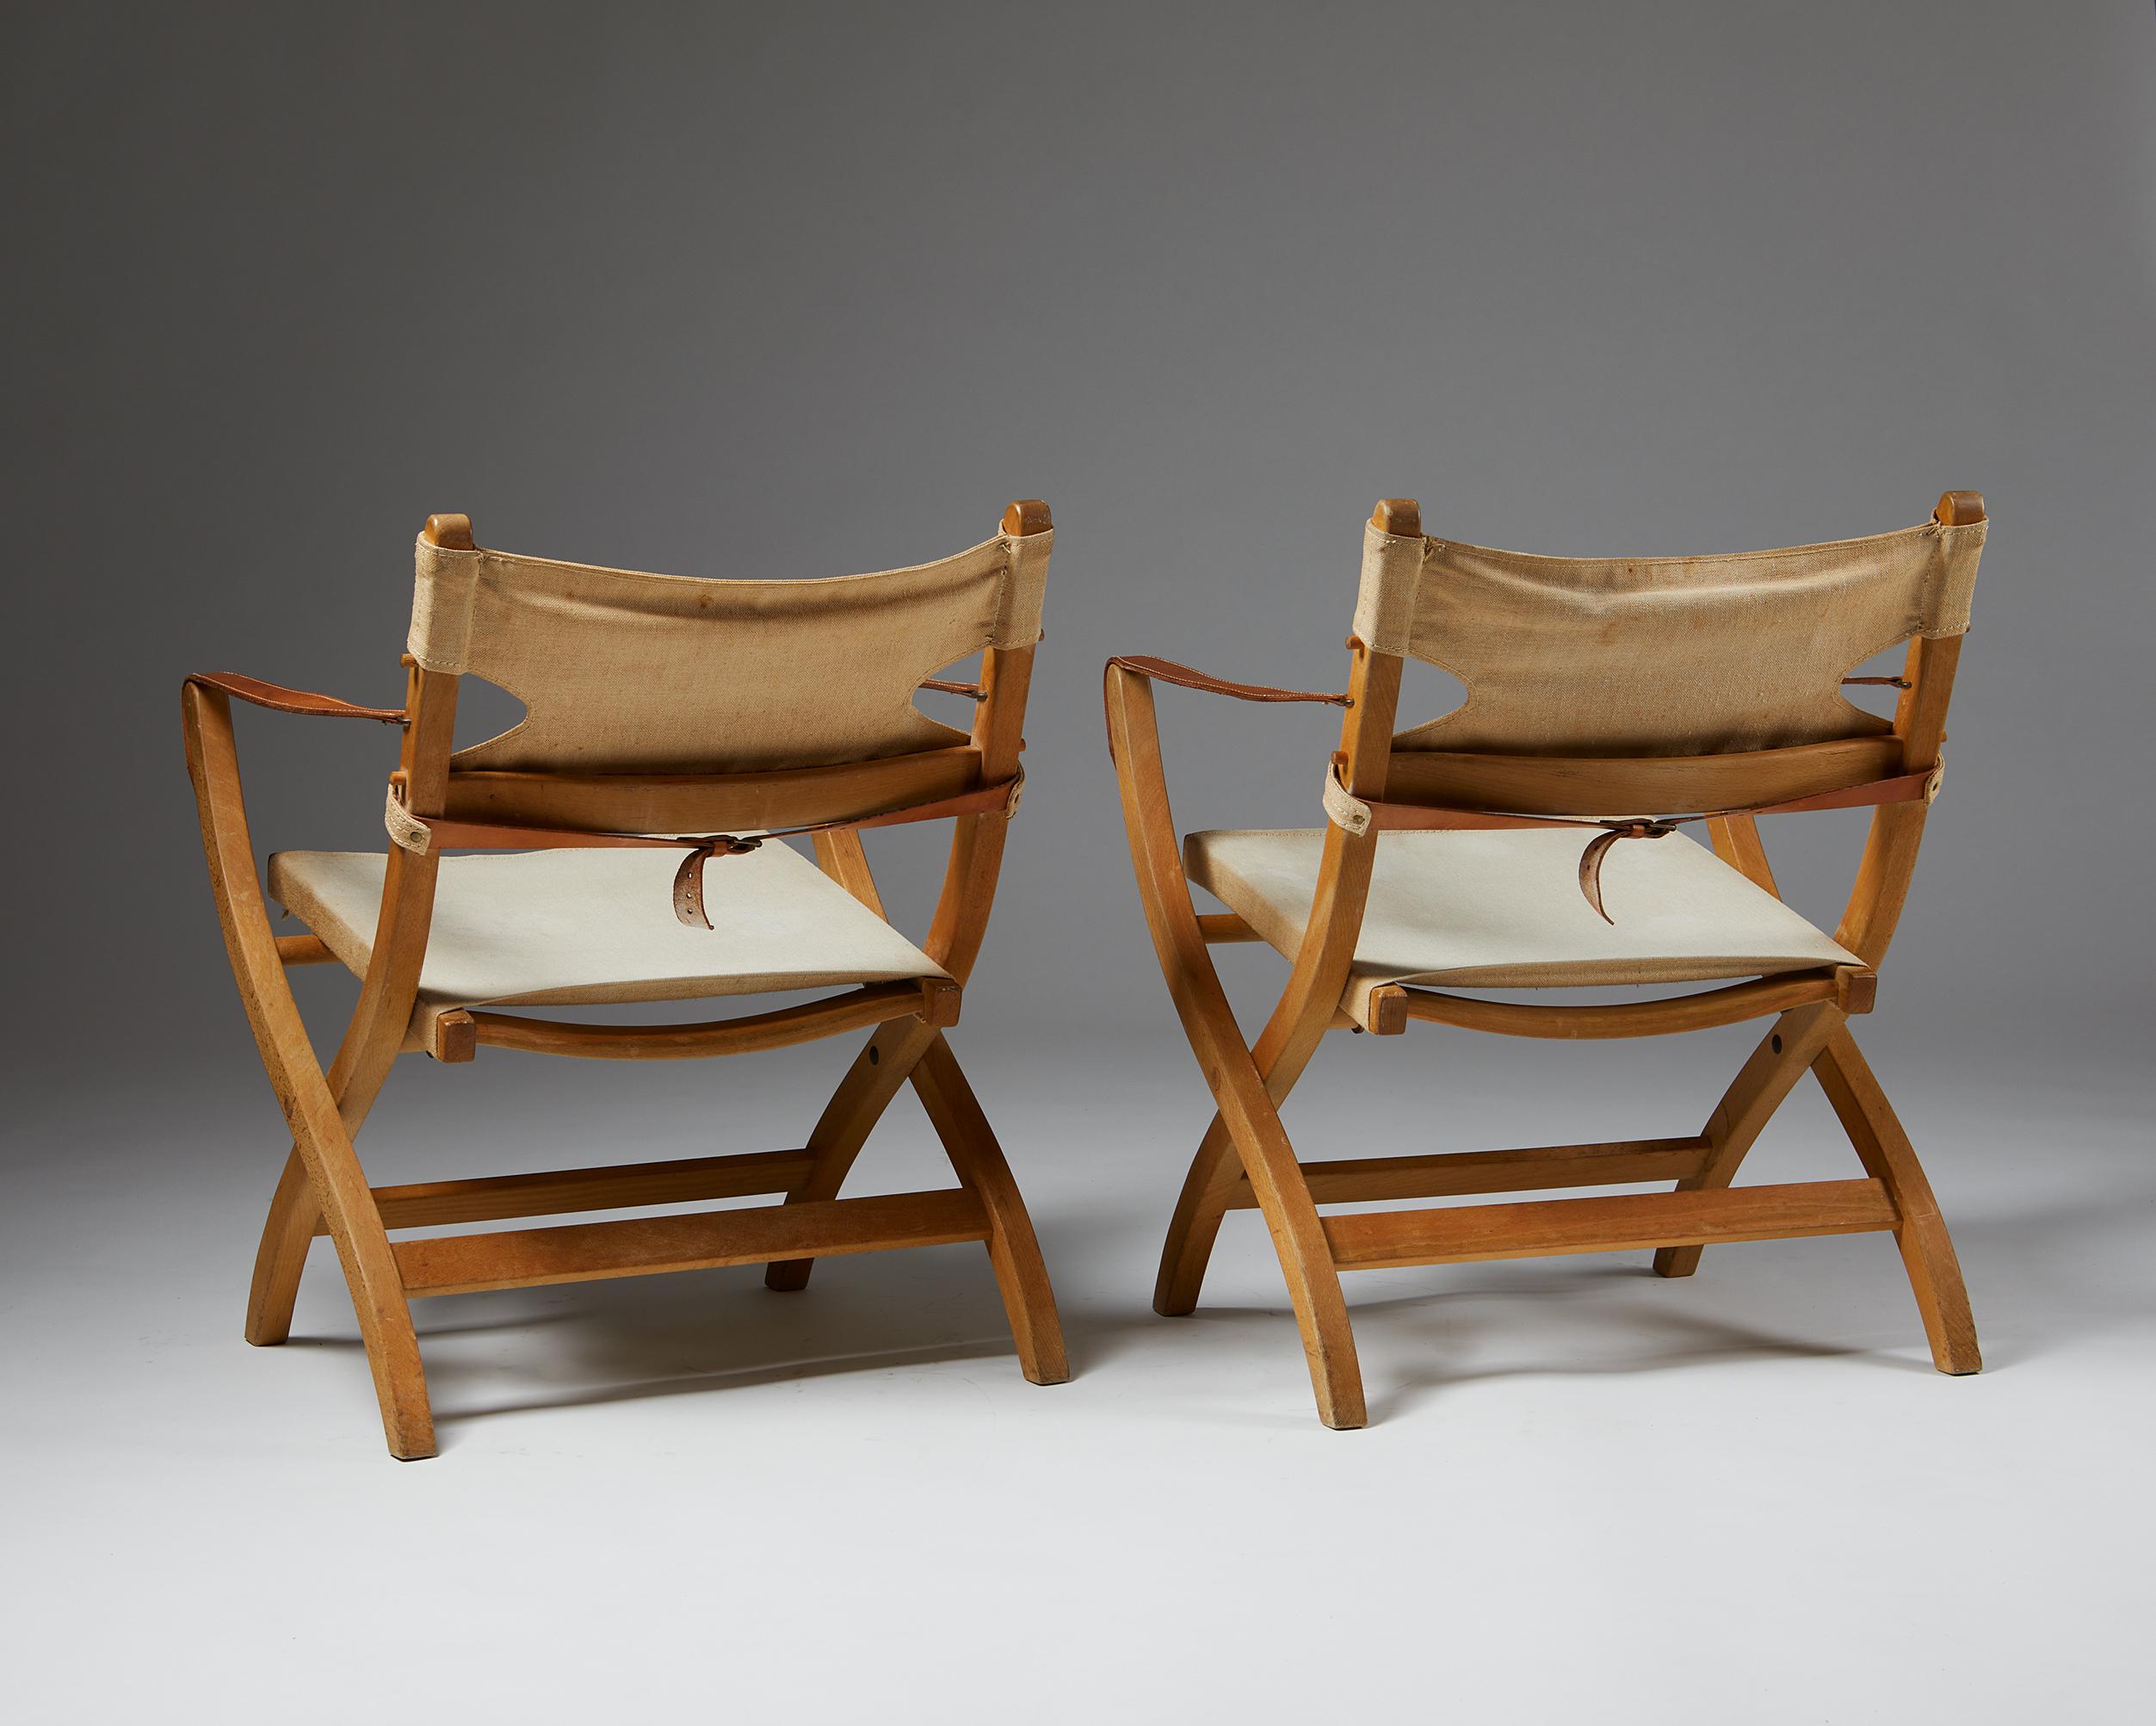 Pair of Folding Chairs Designed by Poul Hundevad for Vamdrup 1